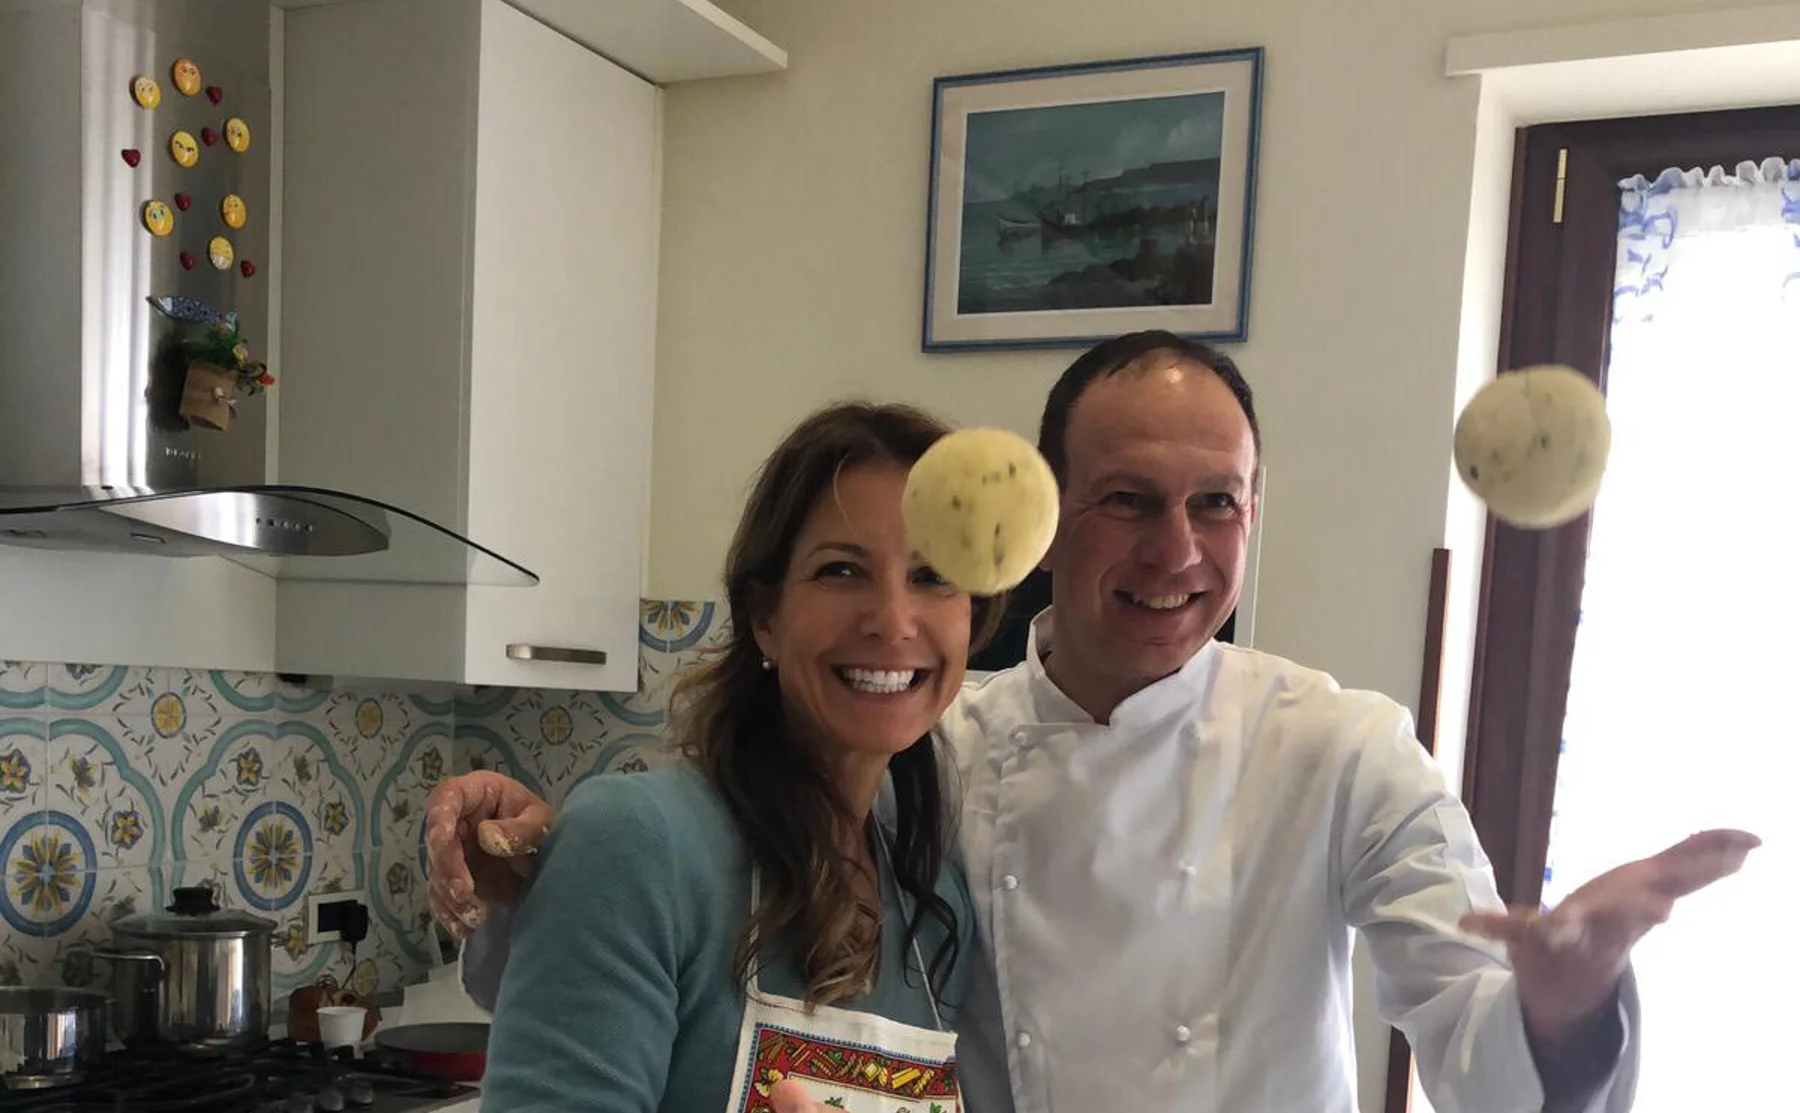 Learn To Make Fresh Pasta With Love - 1208492